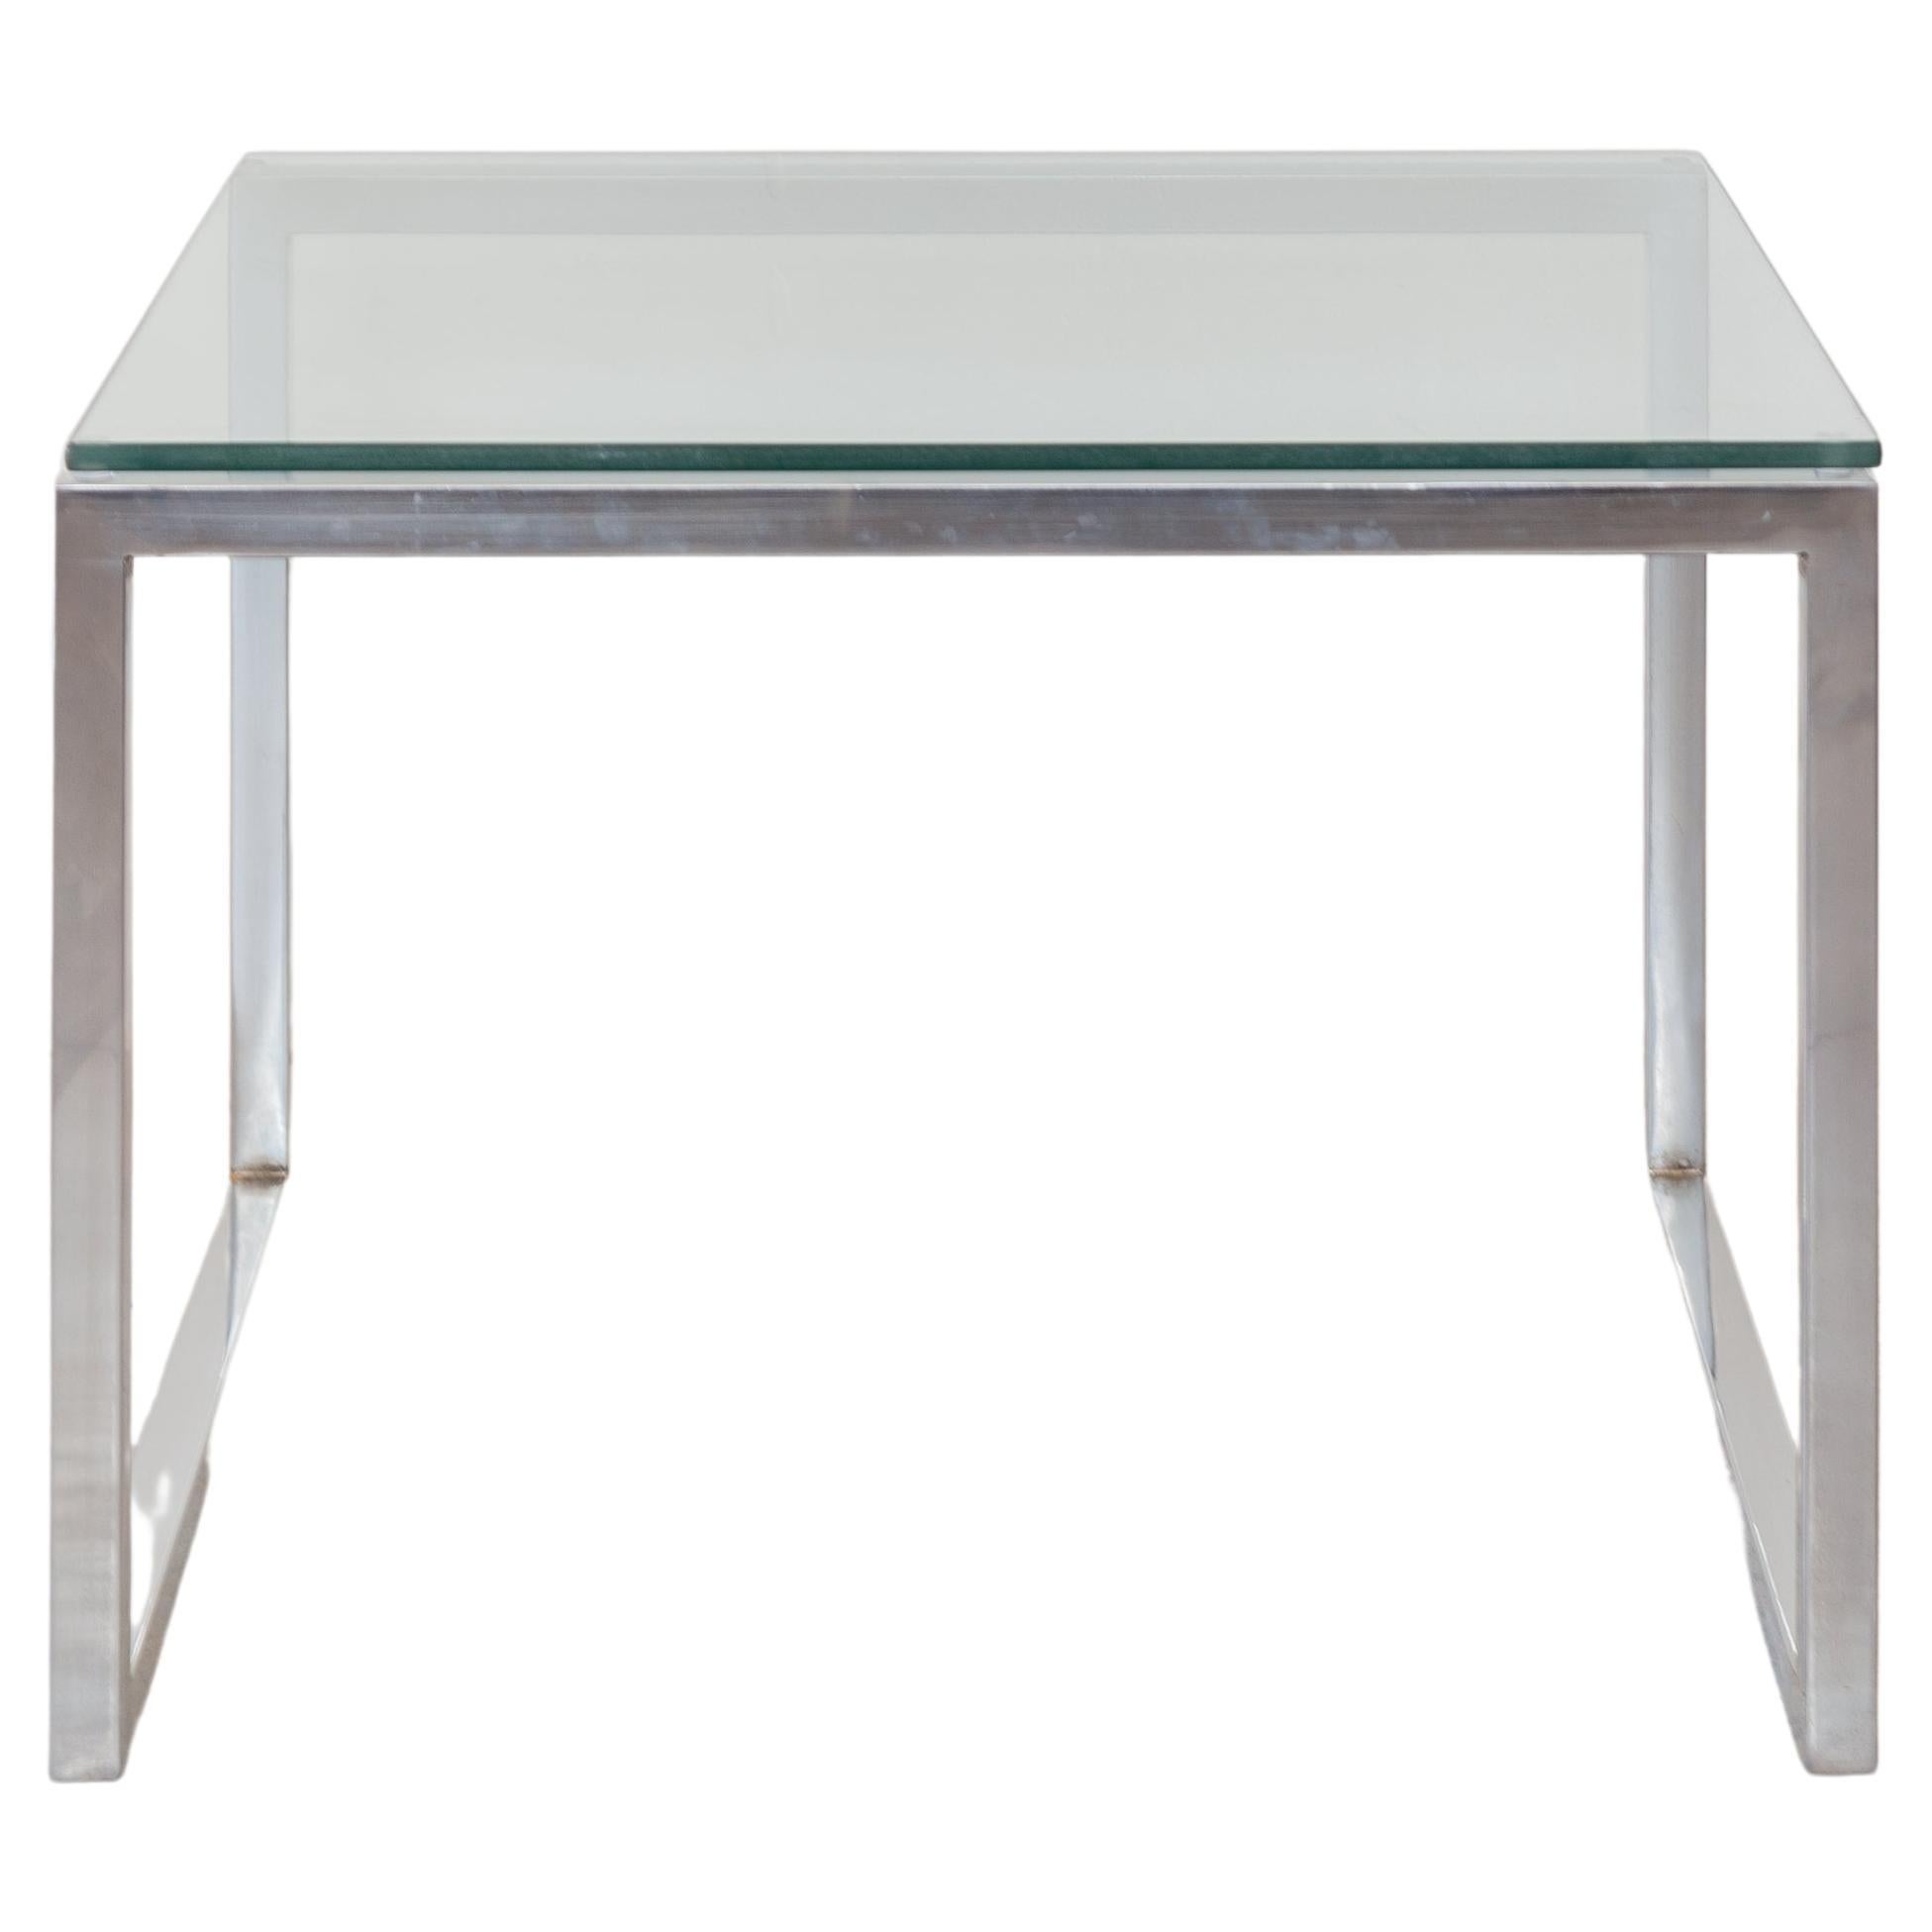 Square Glass and Chrome Coffee-Table, 1960’s, Italy